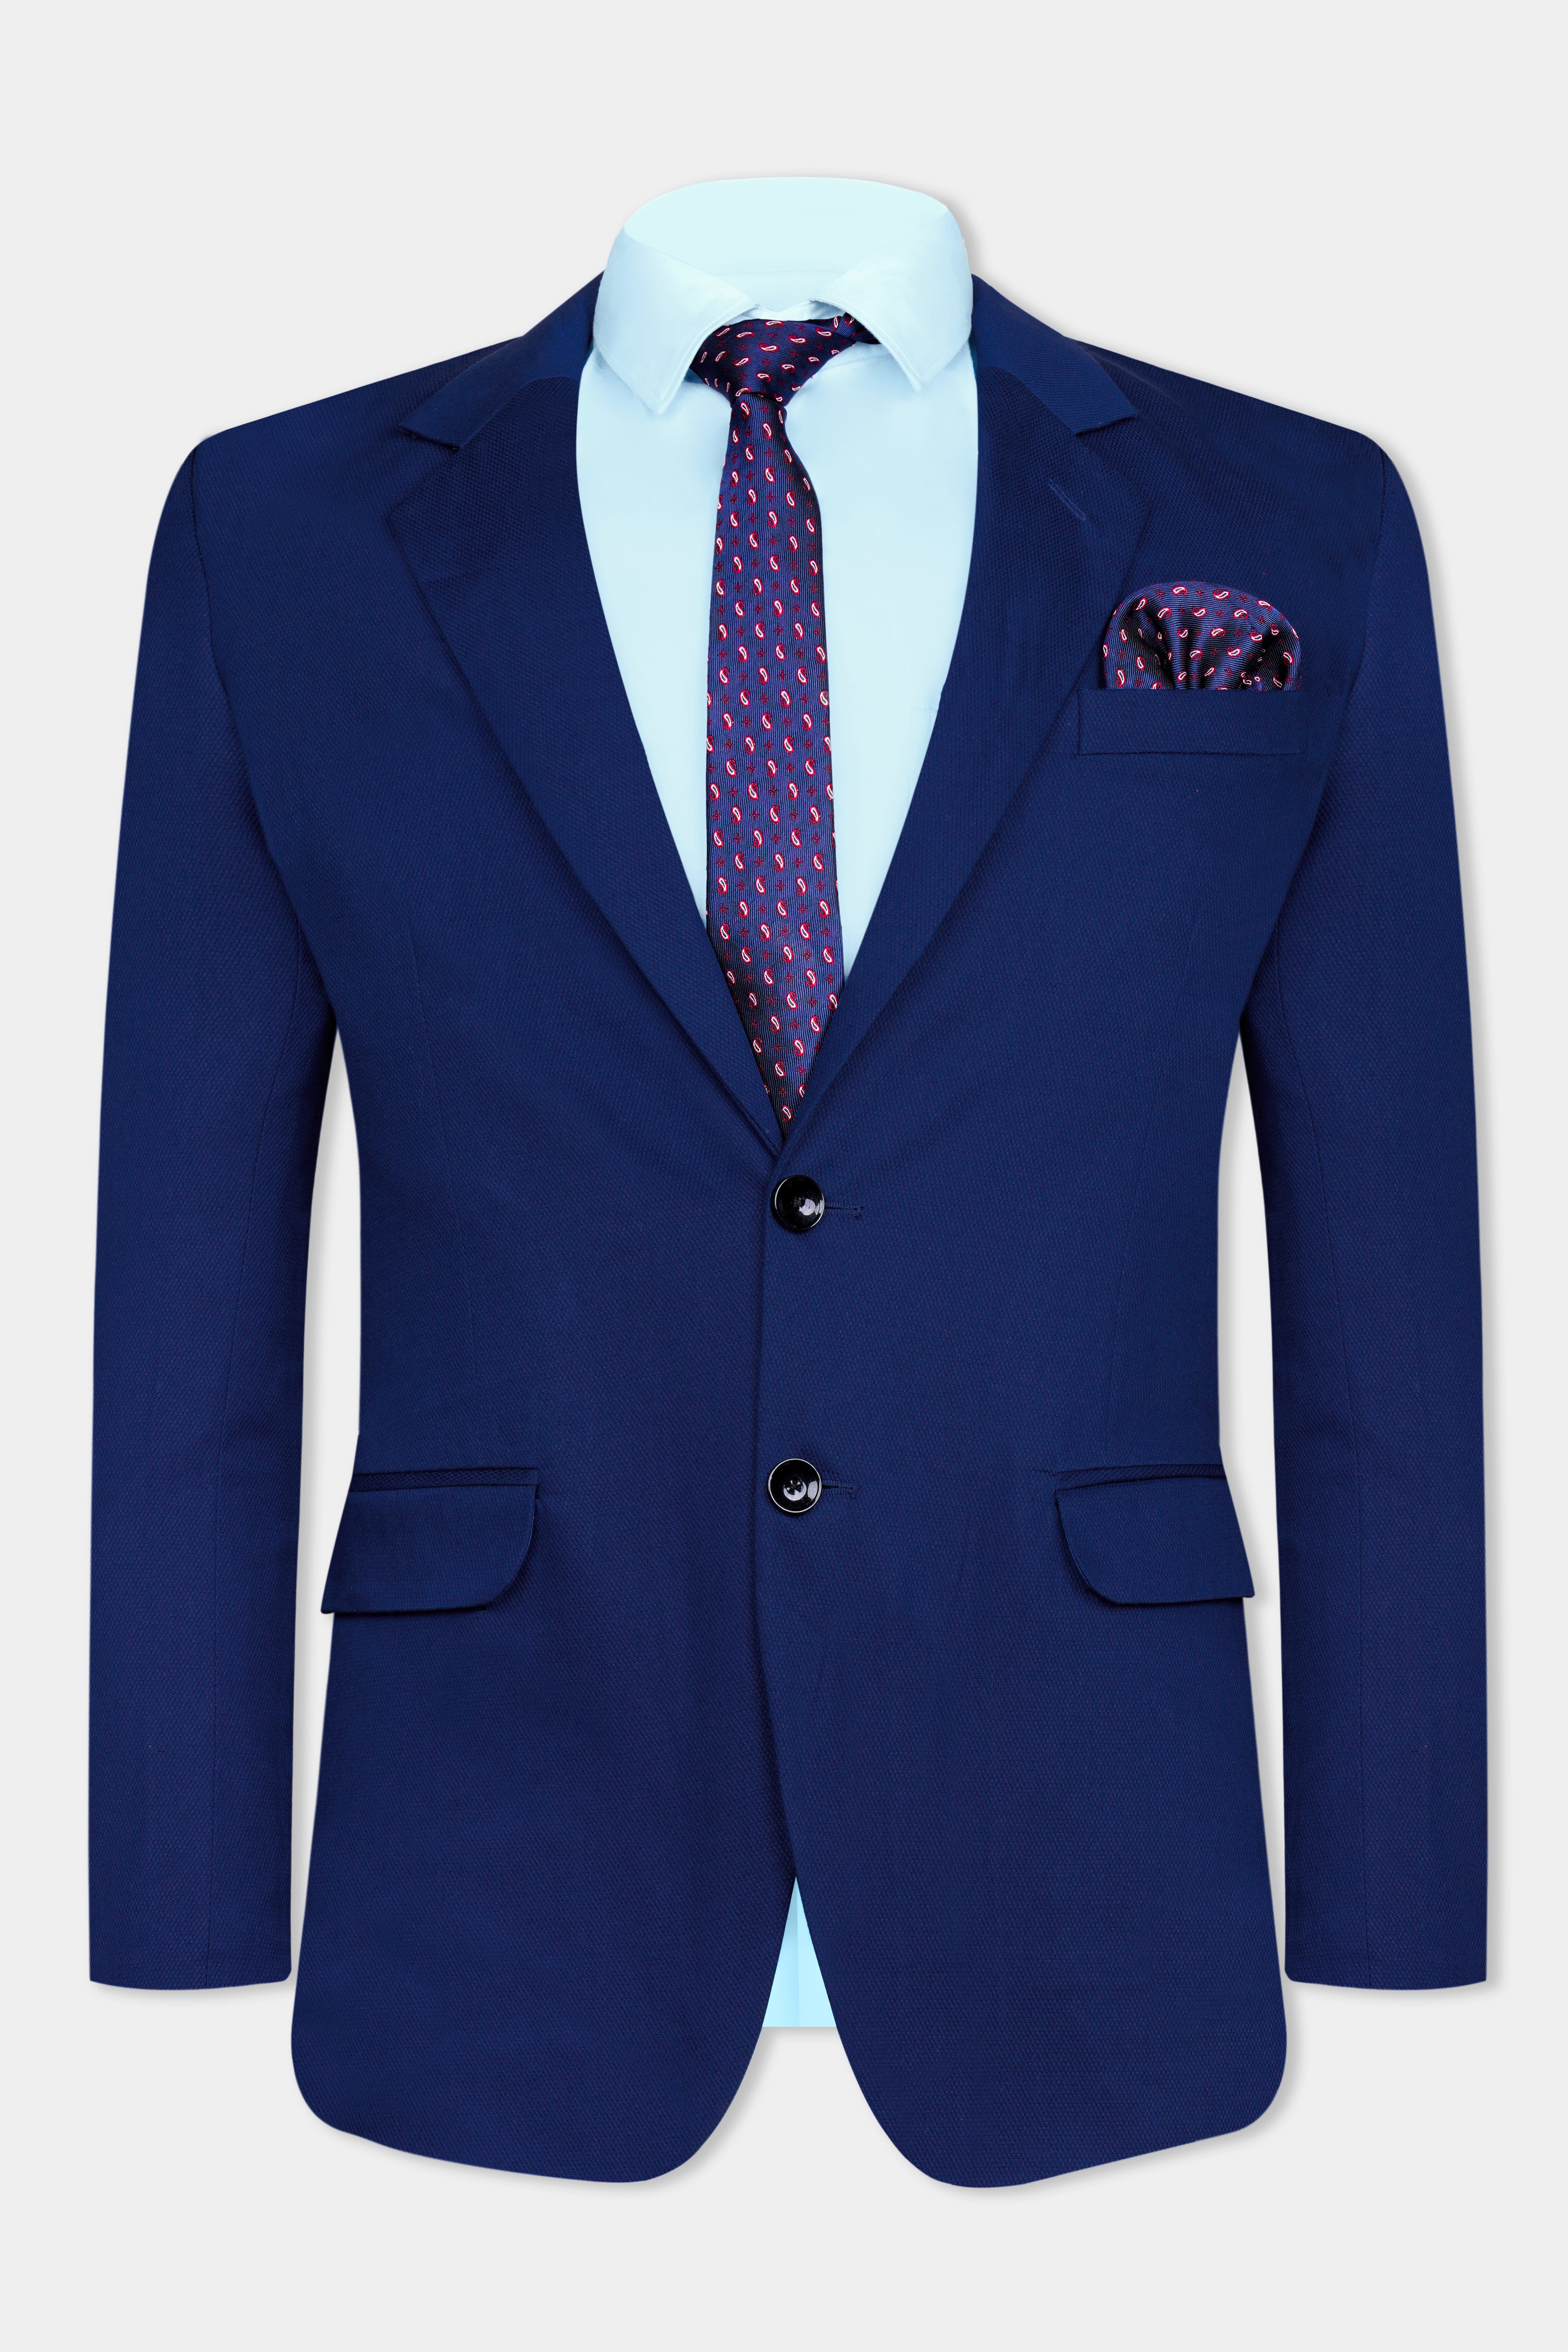 Downriver Blue Wool Rich Single Breasted Suit ST3056-SB-36, ST3056-SB-38, ST3056-SB-40, ST3056-SB-42, ST3056-SB-44, ST3056-SB-46, ST3056-SB-48, ST3056-SB-50, ST3056-SB-52, ST3056-SB-54, ST3056-SB-56, ST3056-SB-58, ST3056-SB-60